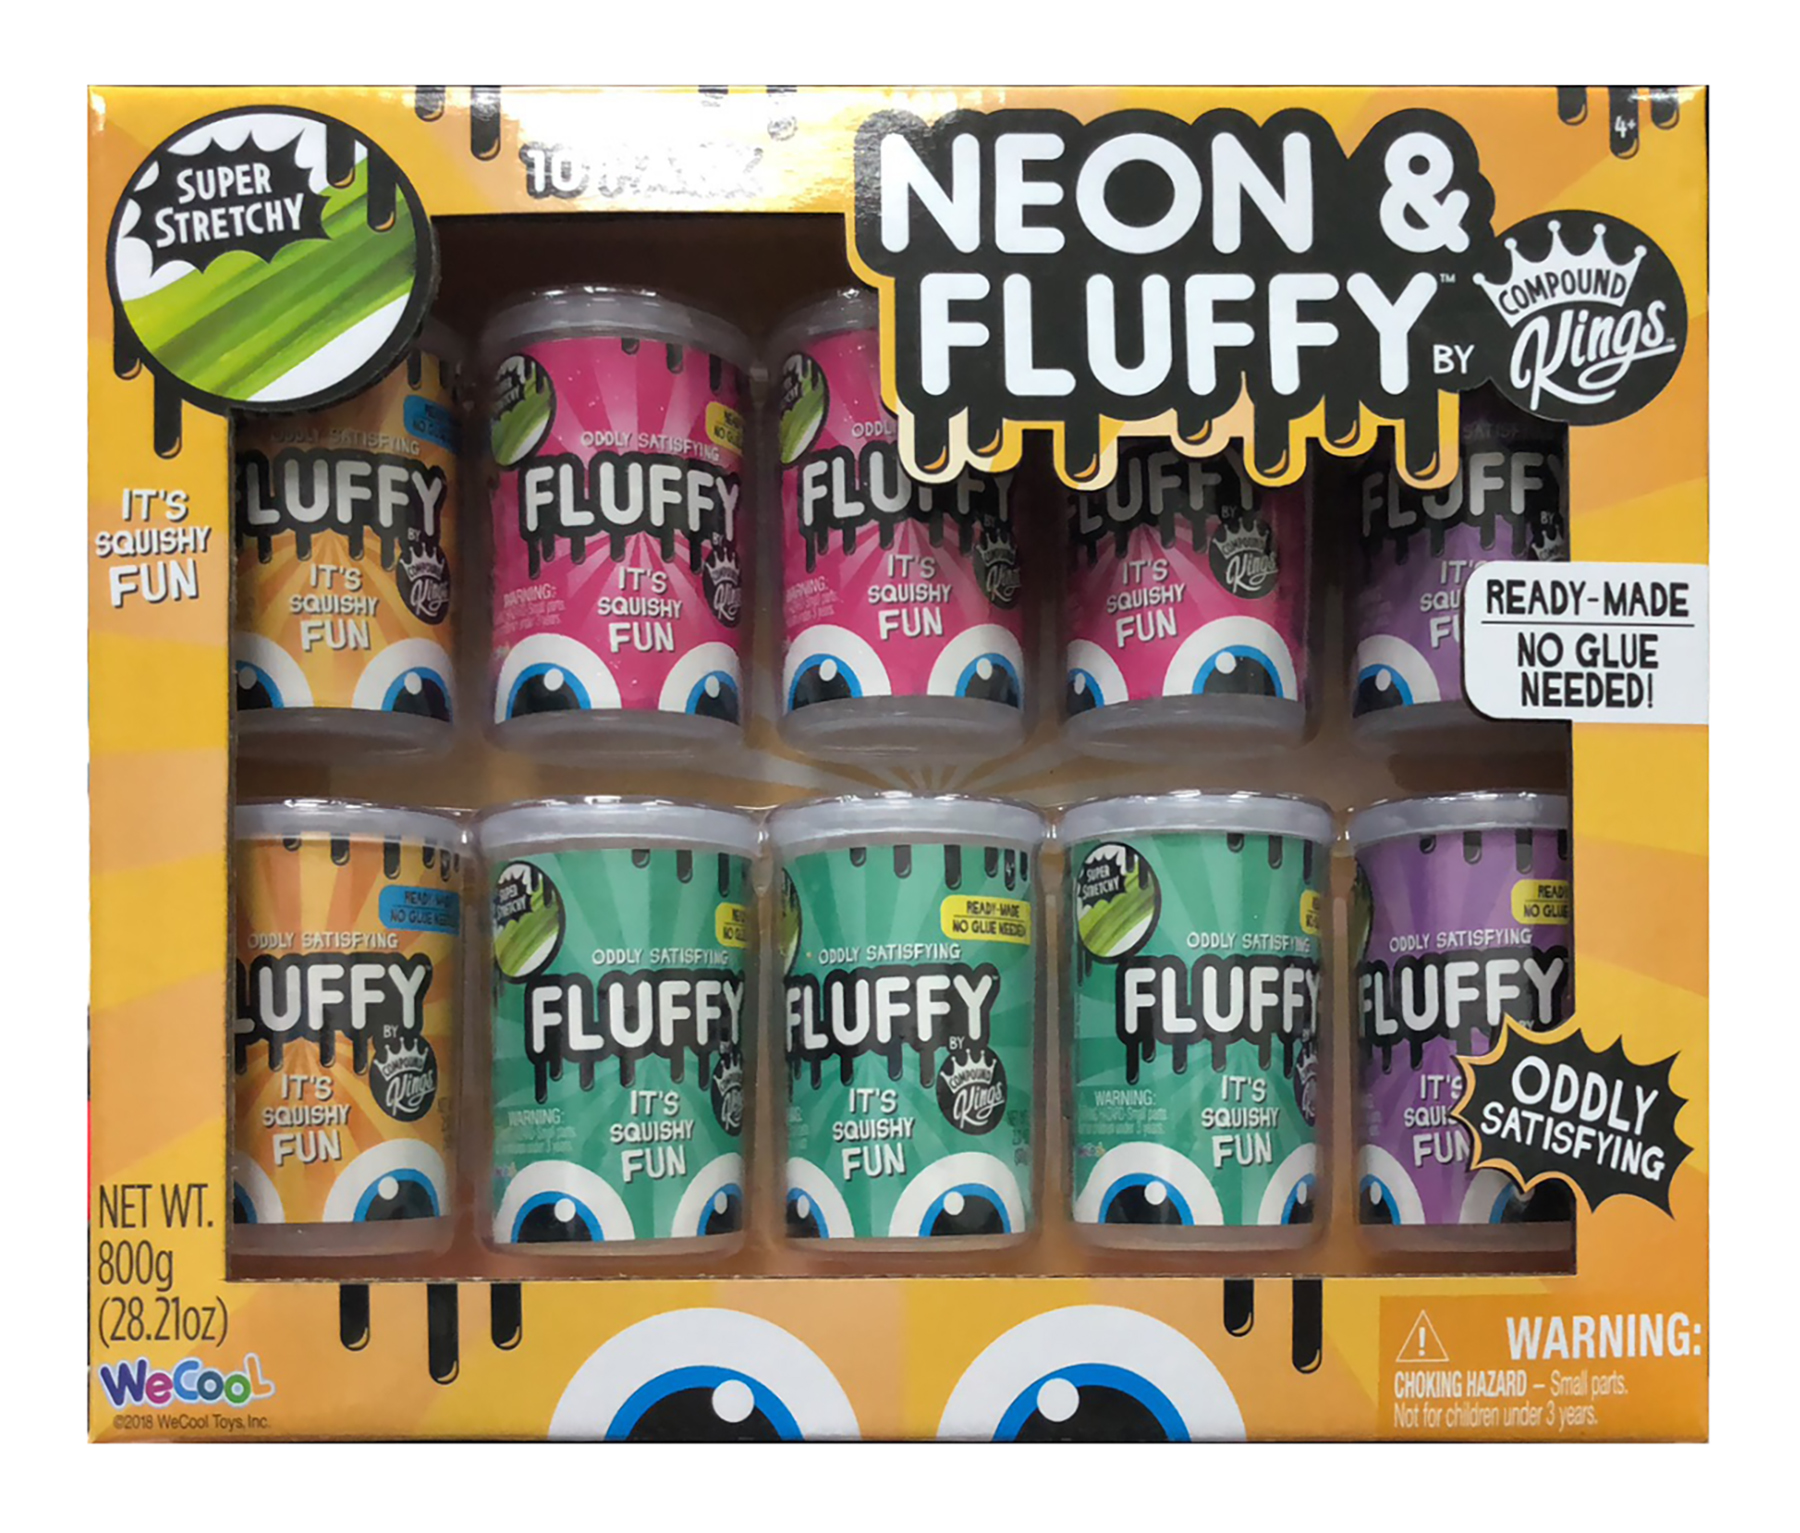 Compound Kings 10-Pack of High Quality Neon & Fluffy Slime - image 1 of 1